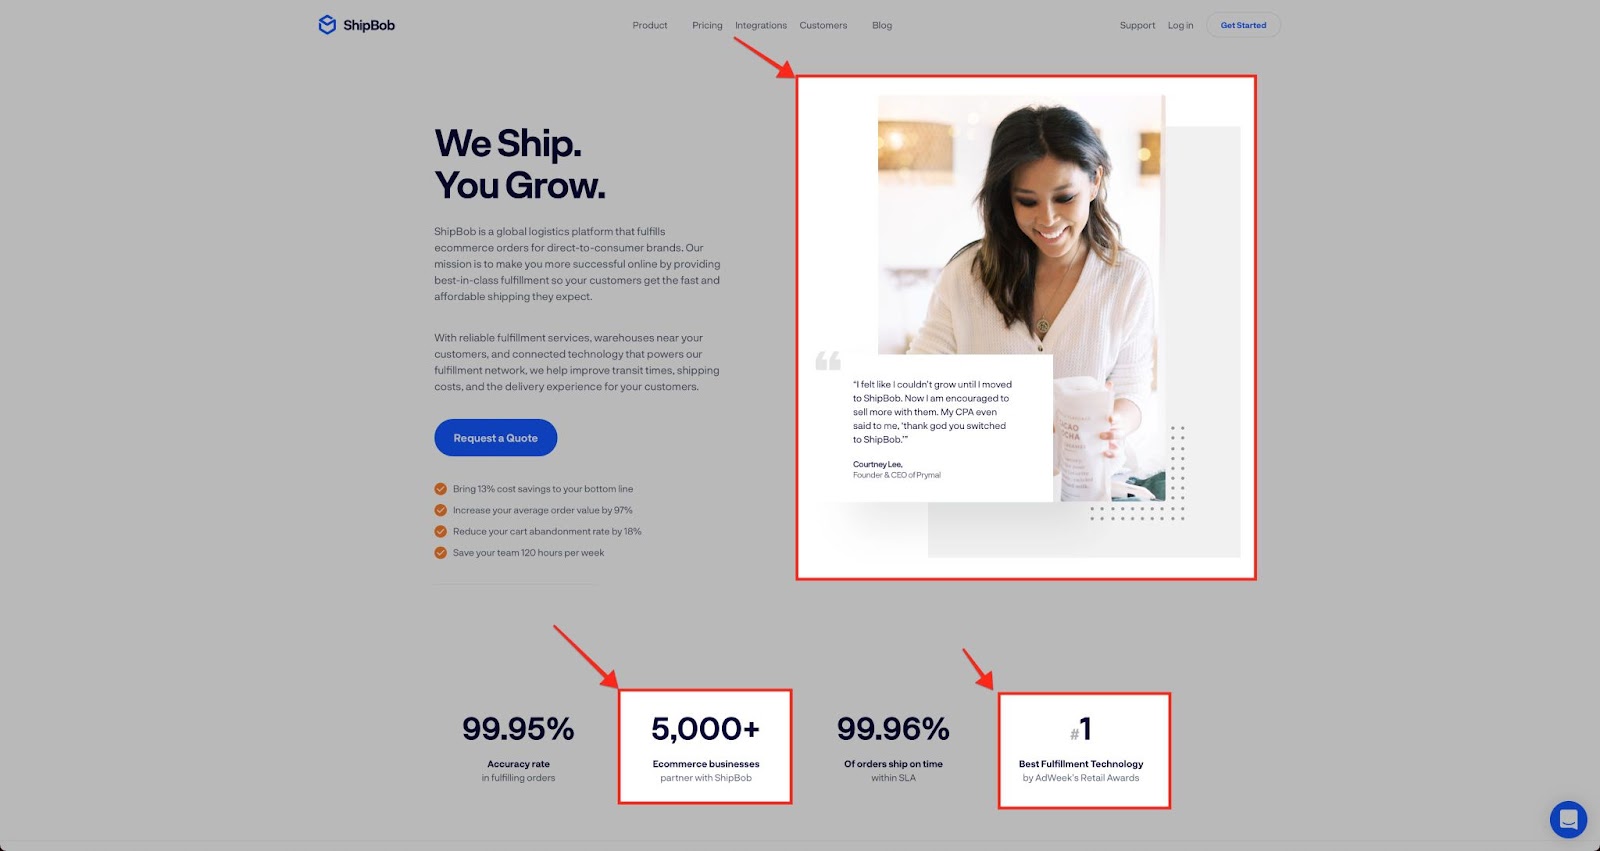 Shipbob as a best user onboarding example for their social proof. 